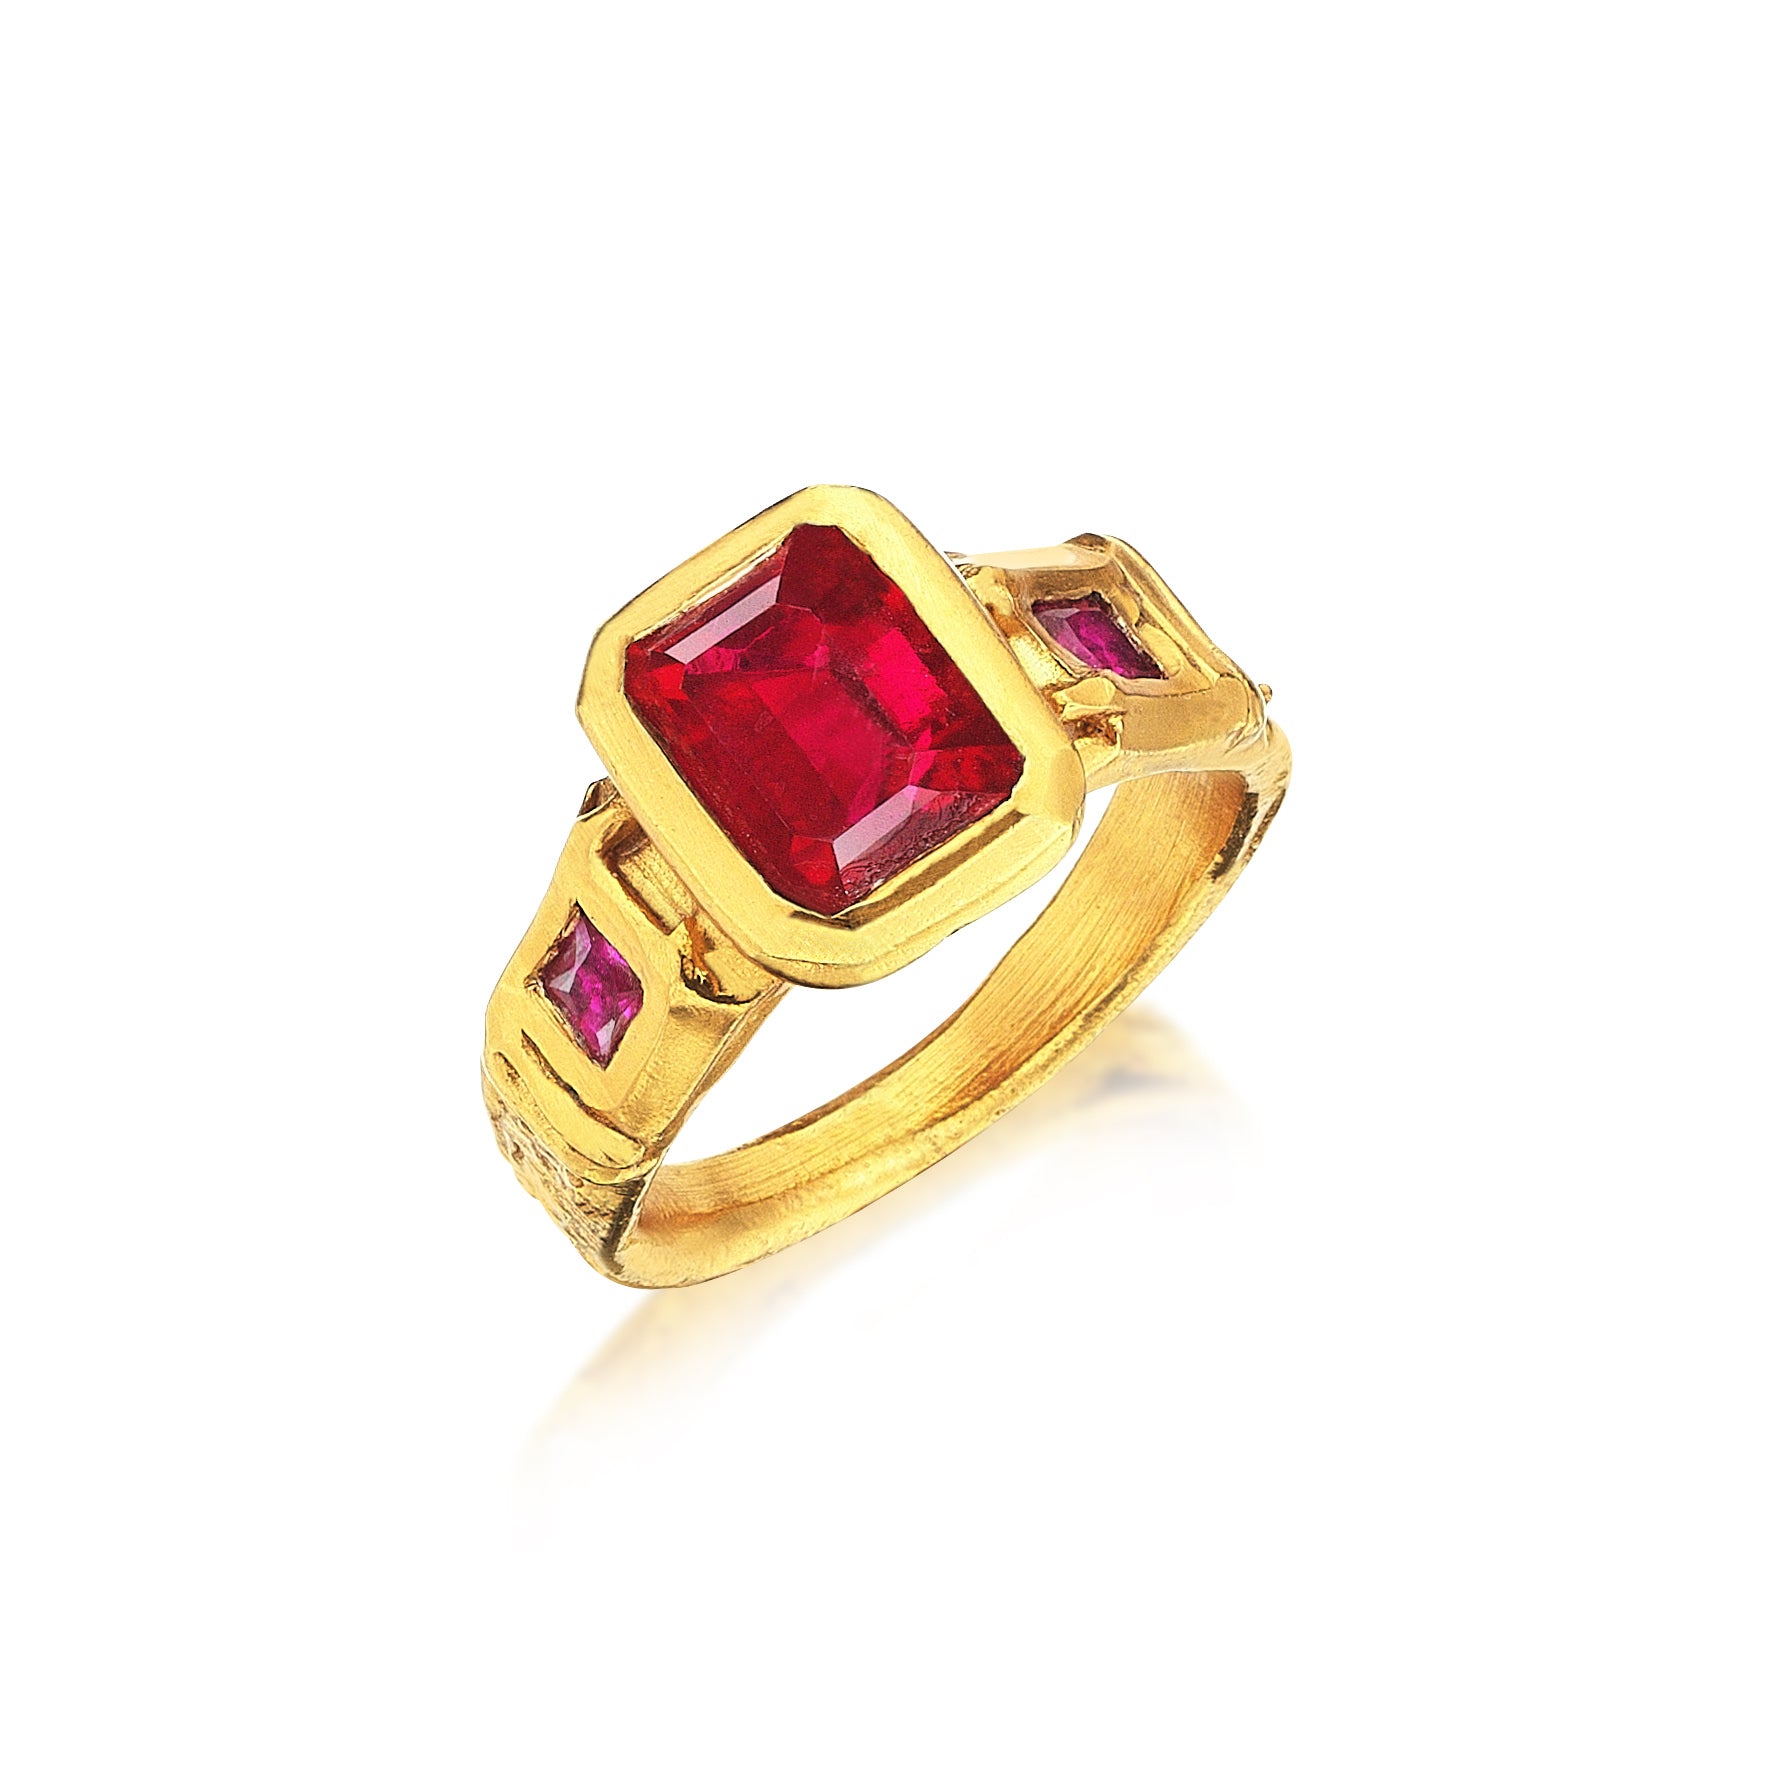 Hip Hop New Design Square Cut Ruby Ring 3 Real Gold Plated Jewelry For  Women Fashion Engagement Wedding Ring From Livex516, $22.12 | DHgate.Com